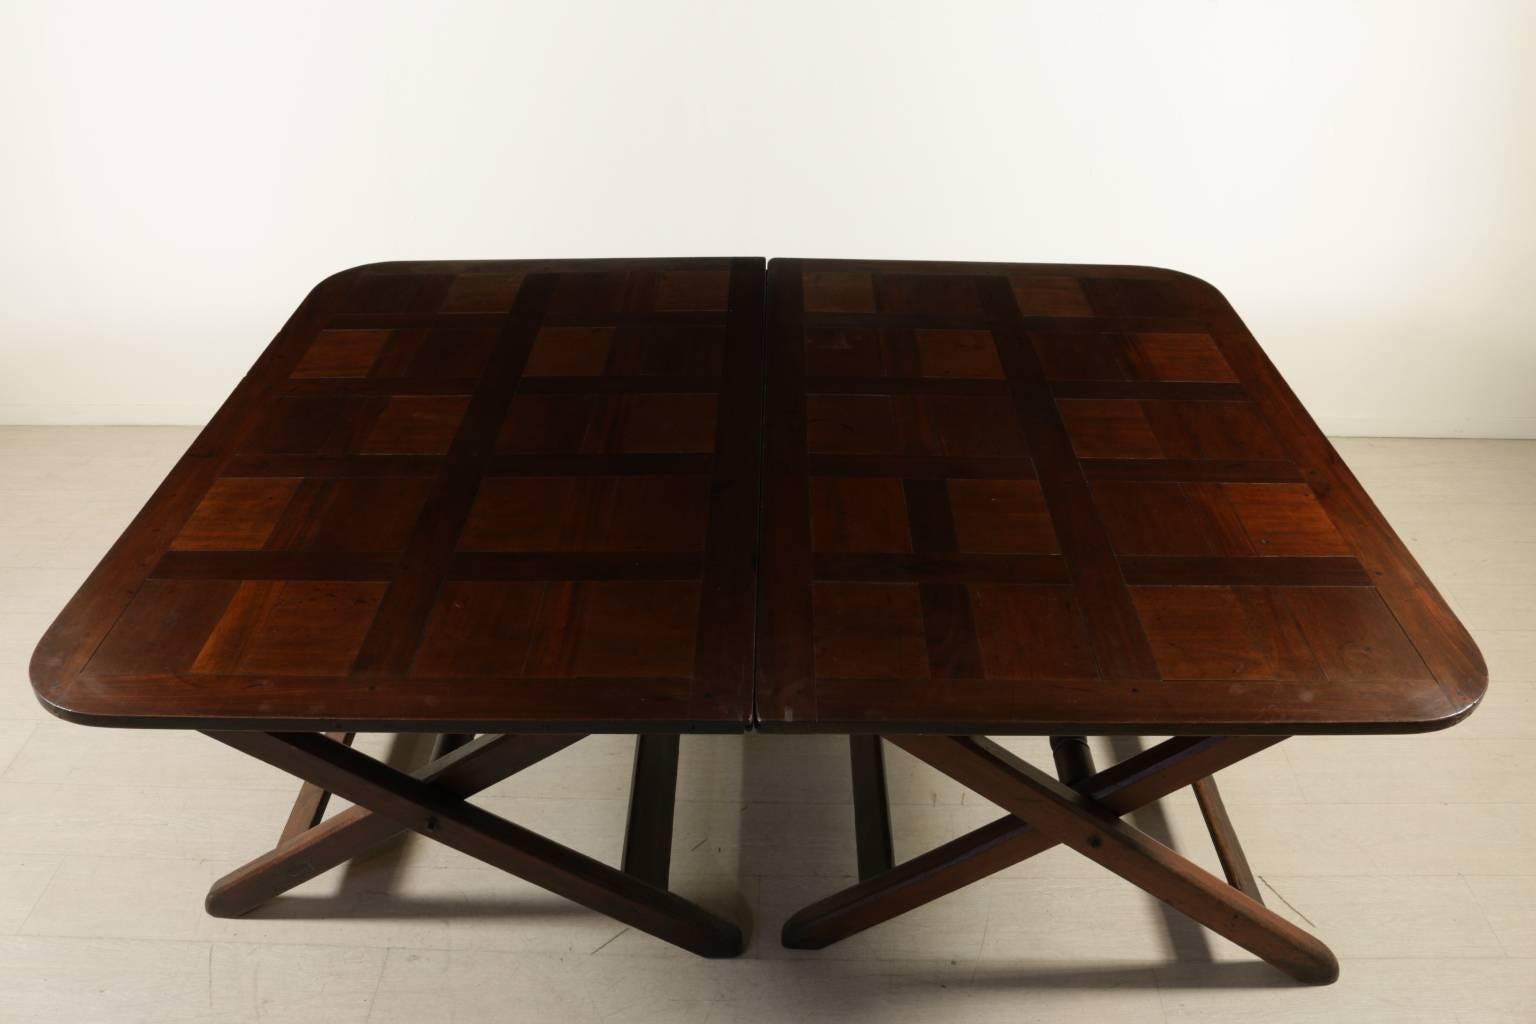 A pair of 18th century English mahogany trestle tables joined in one single top. Tresle supports linked by a longitudinal turned cross-member. Elegant solid mahogany top.